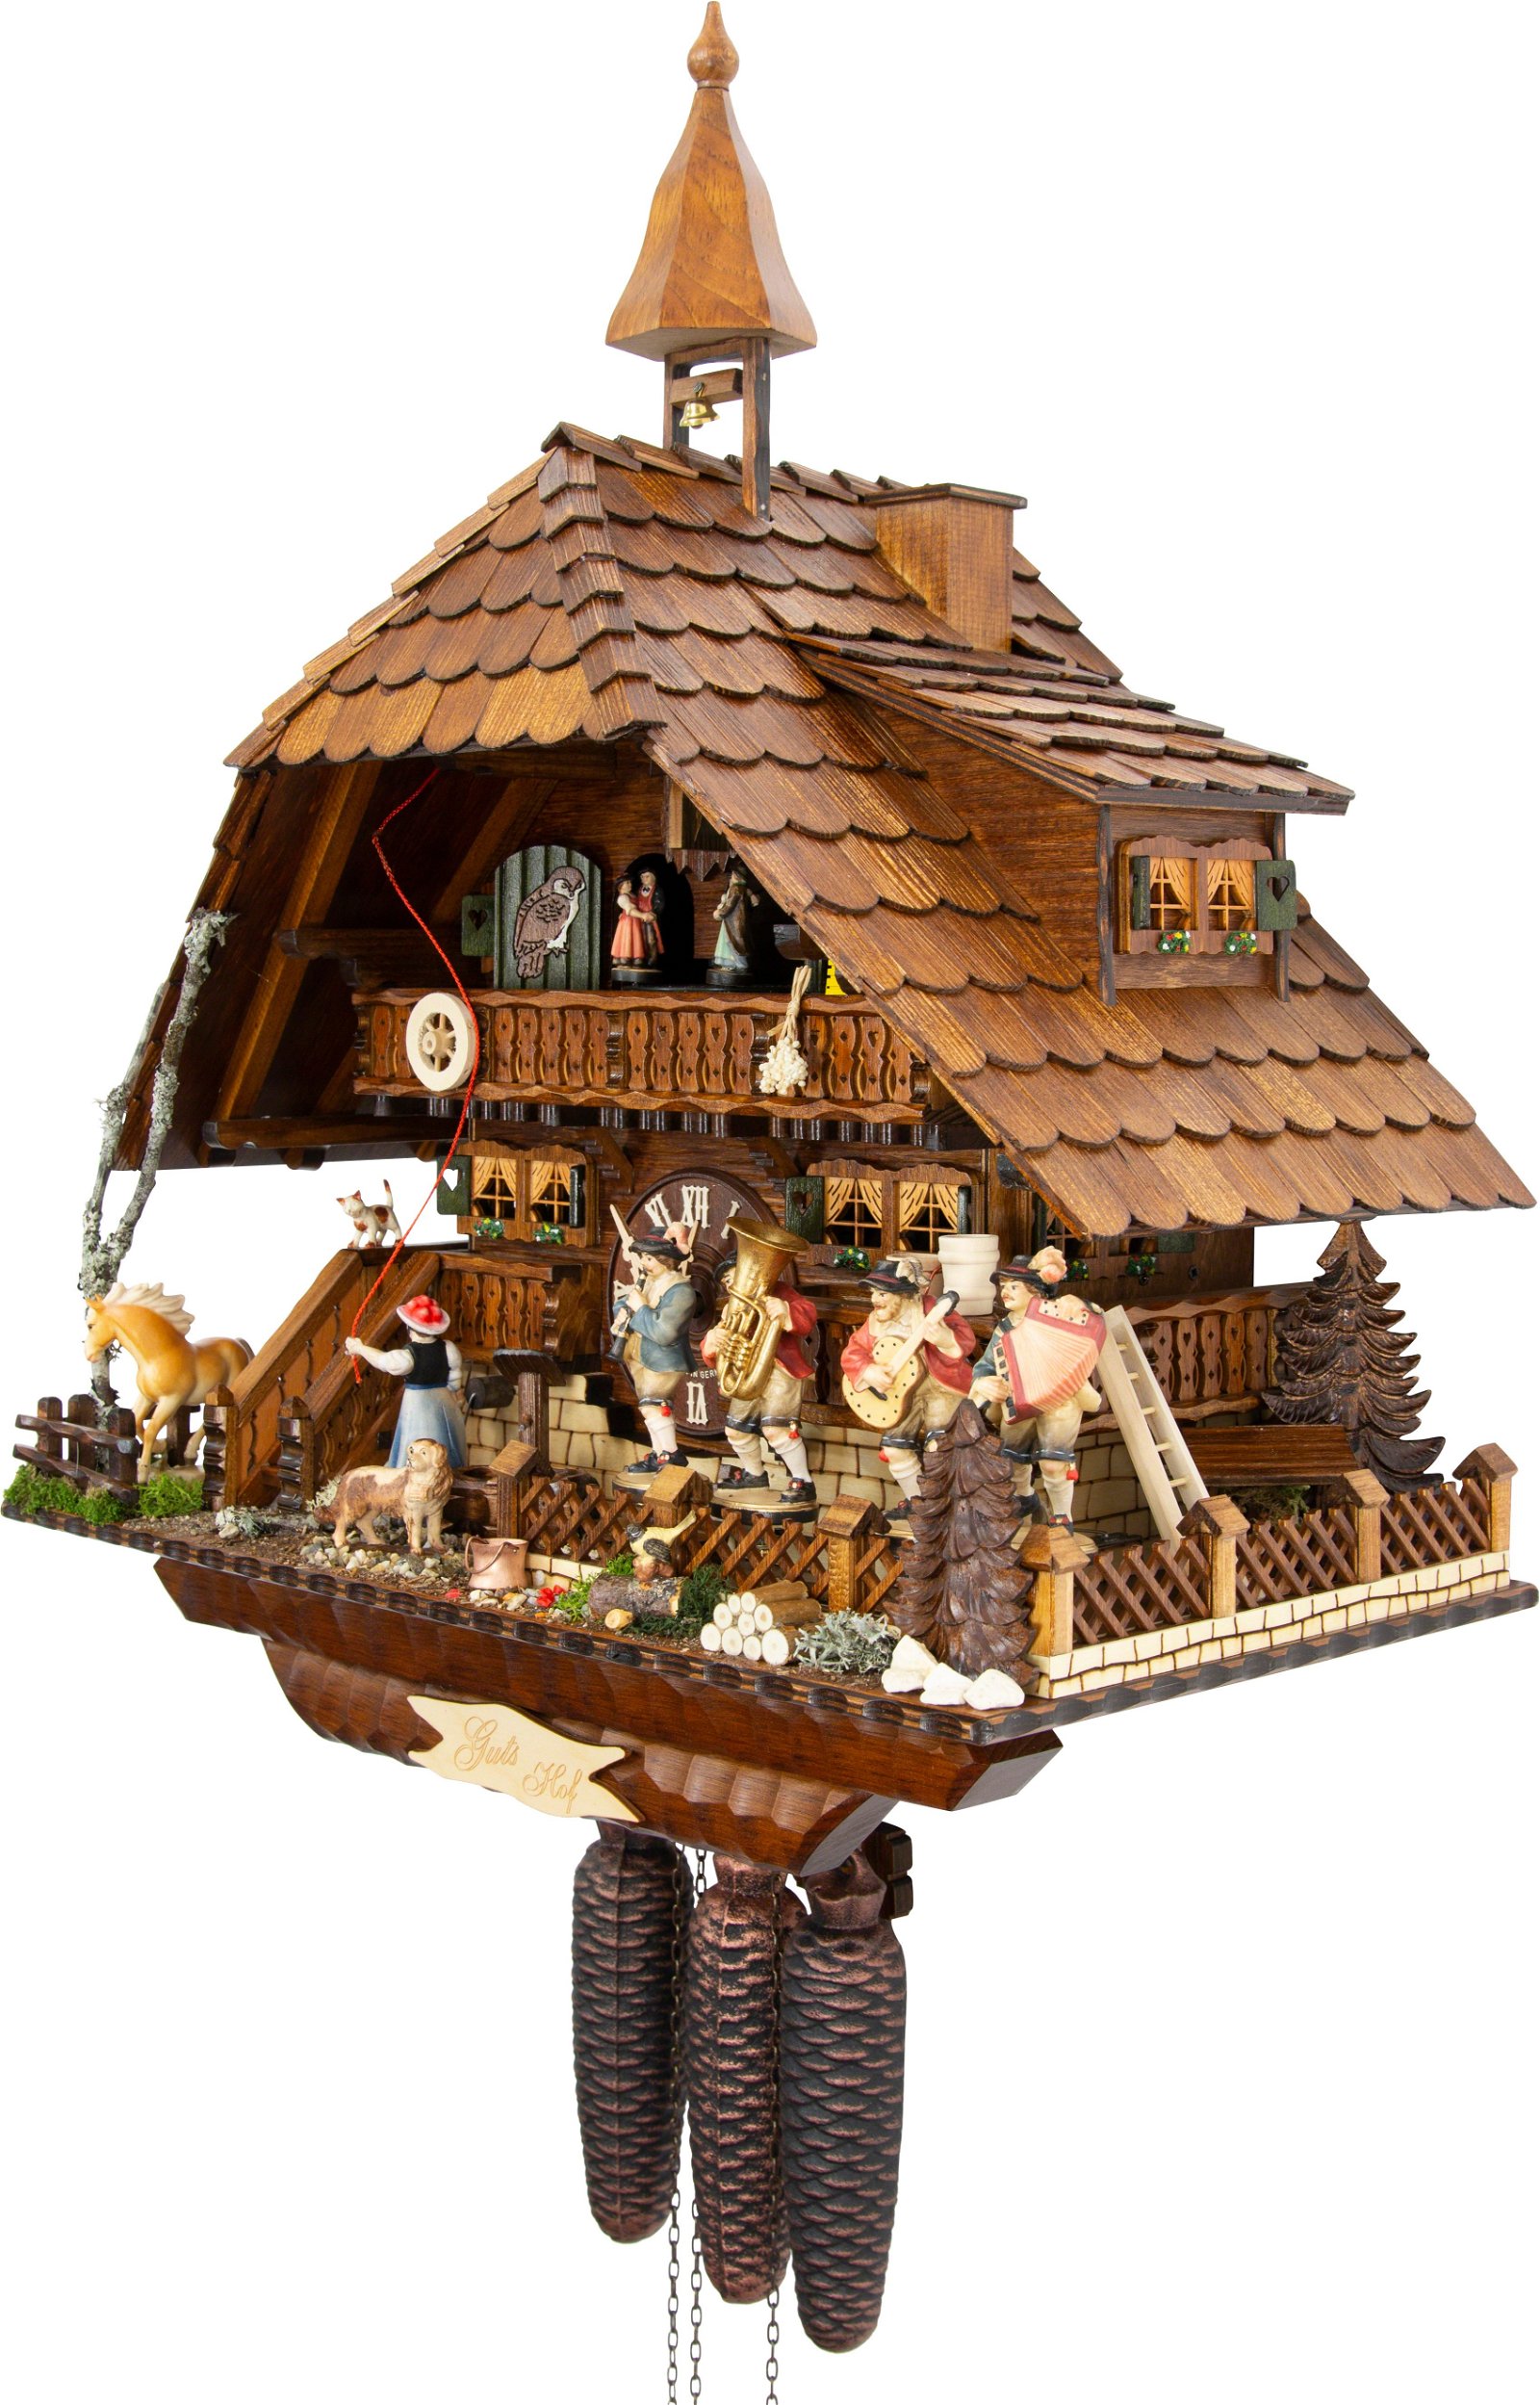 Cuckoo Clock 8-day-movement Chalet-Style 56cm by August Schwer